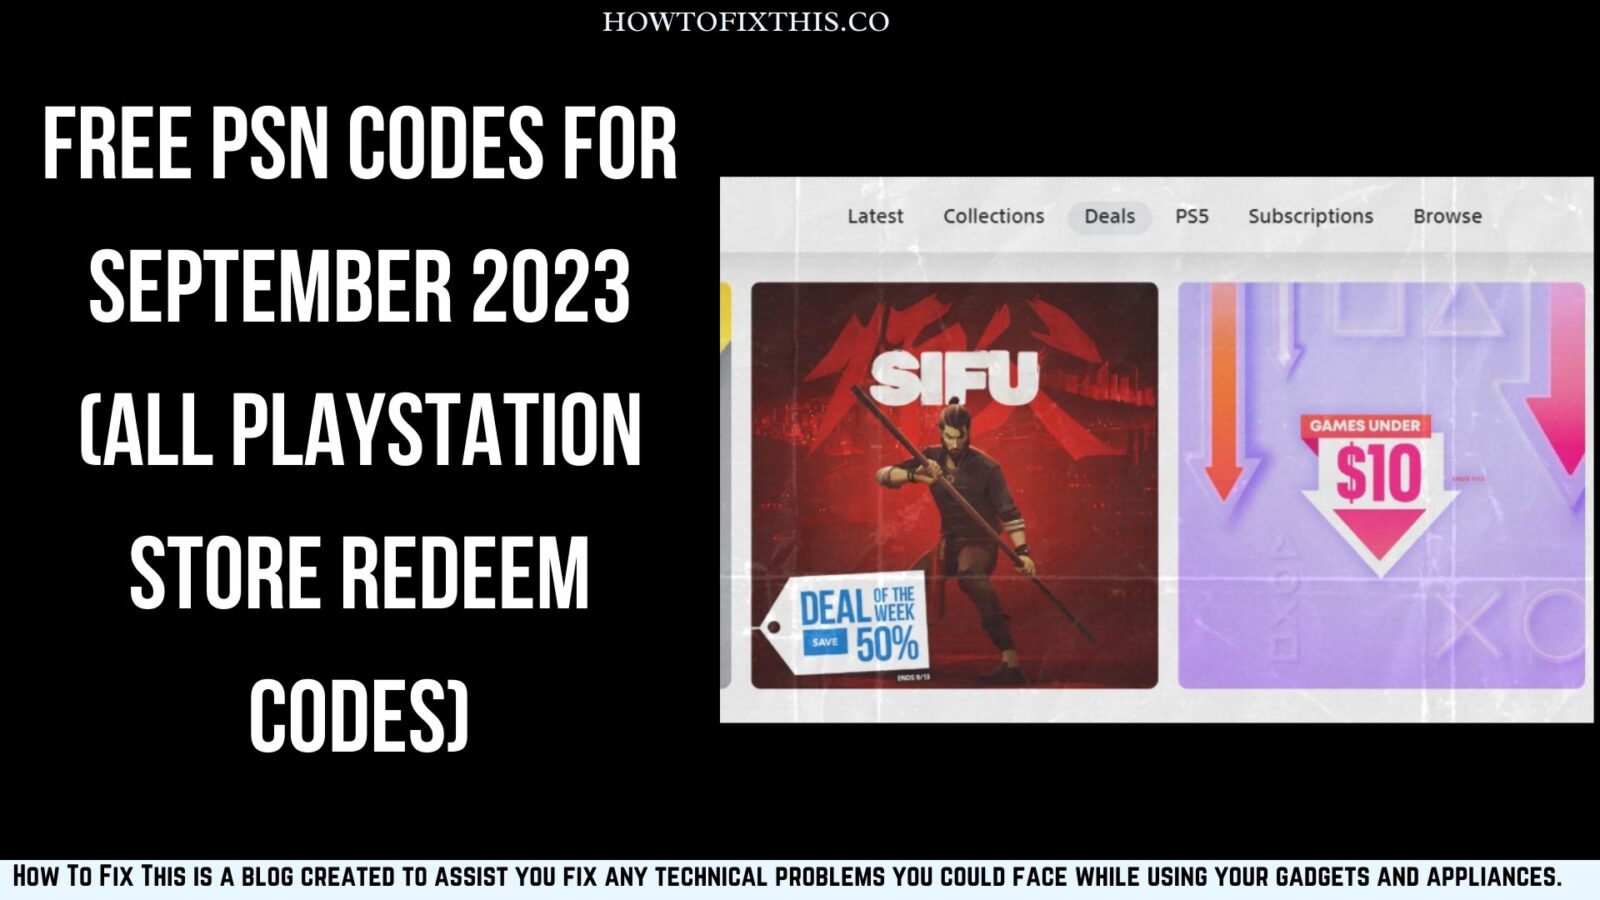 Free PSN Codes for September 2023 (All PlayStation Store Redeem Codes)